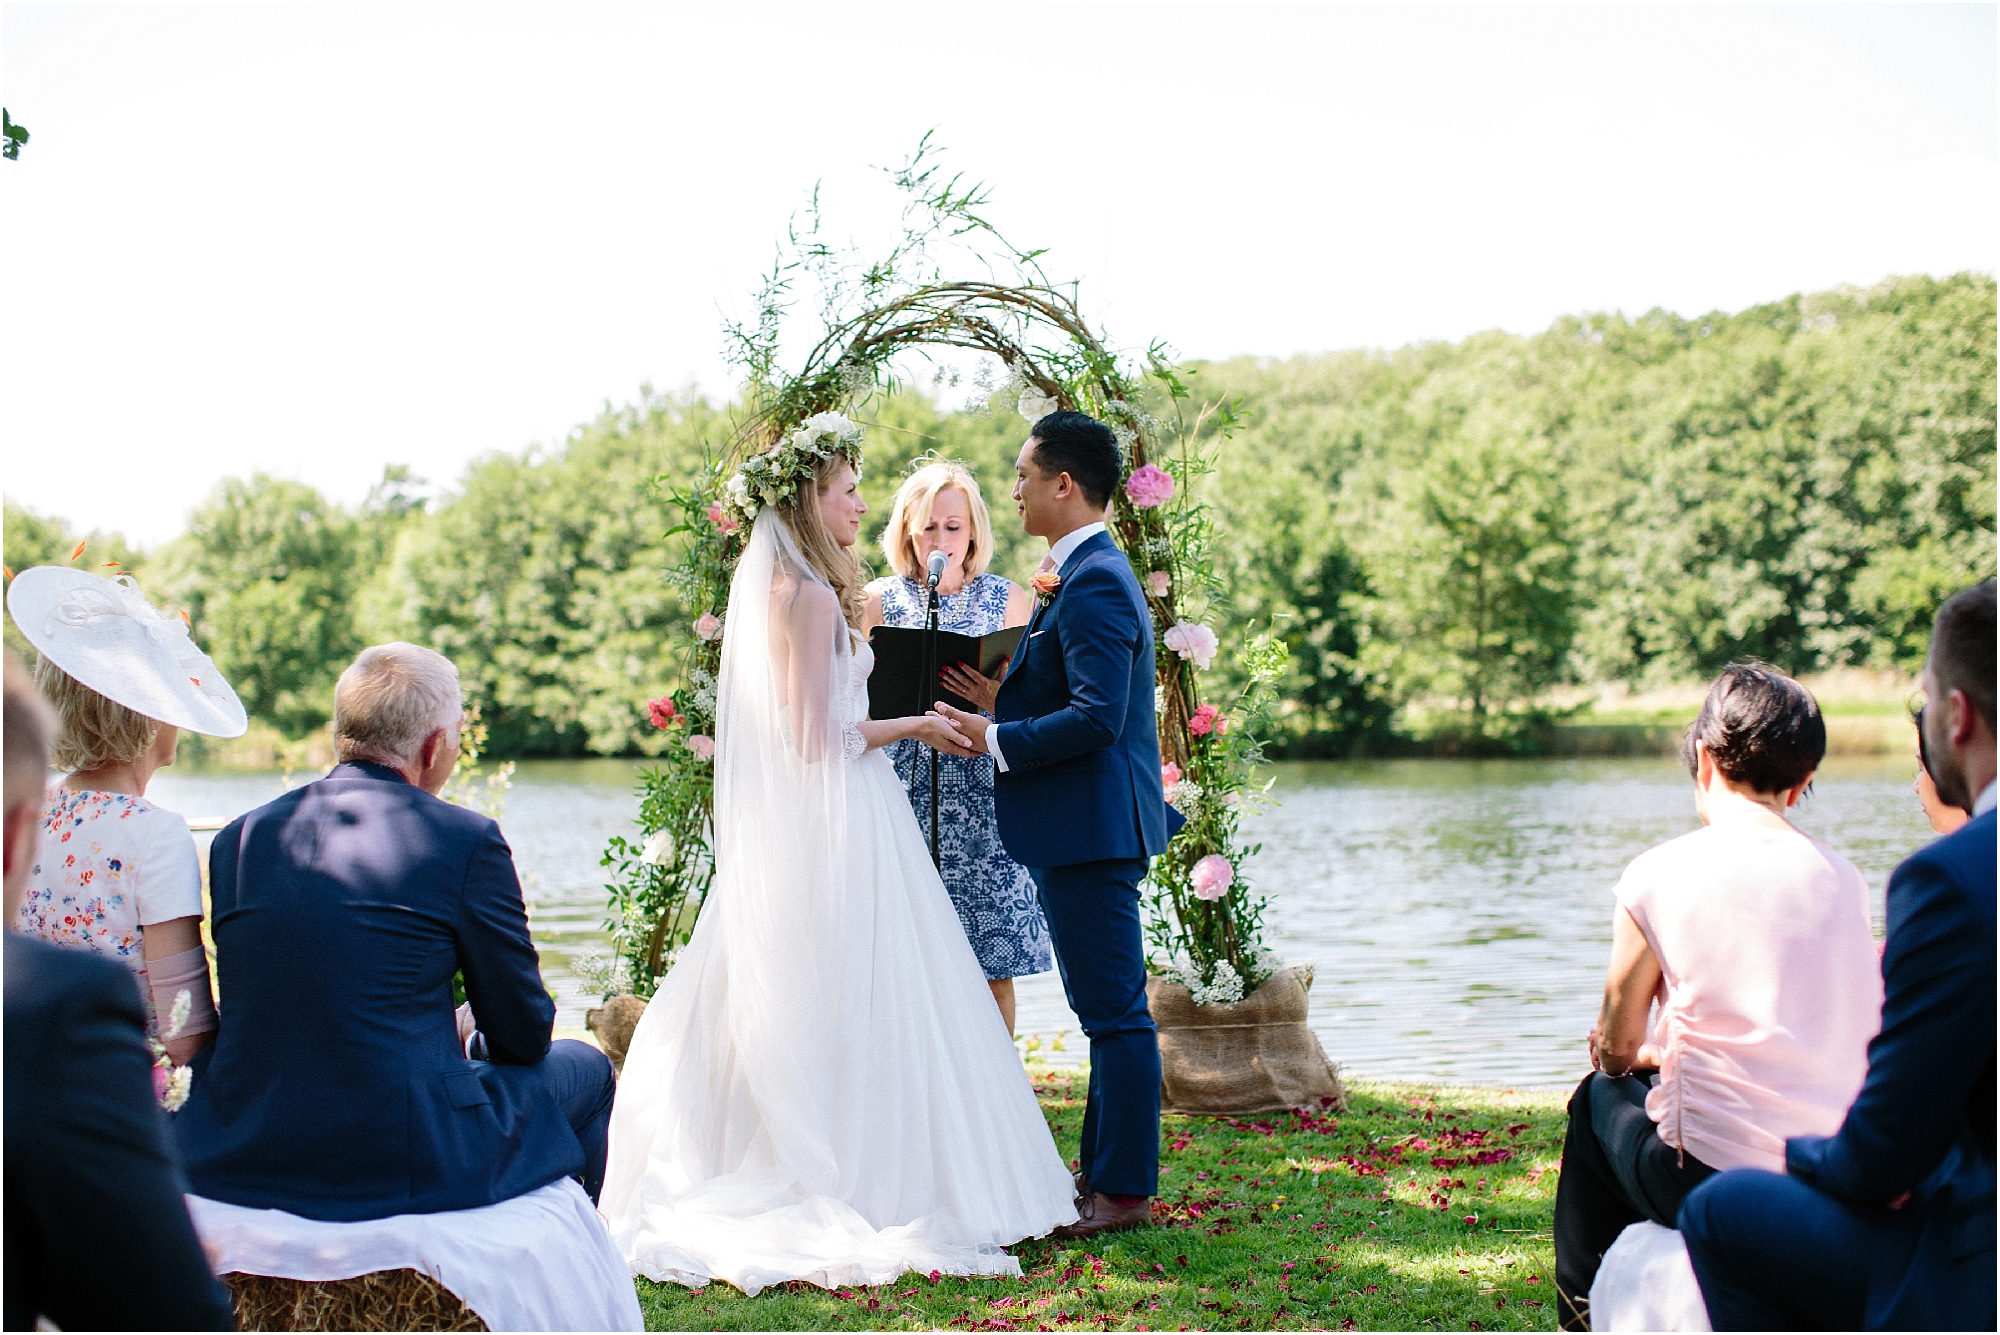 Outdoor wedding ceremony at Duncton Mill Fishery